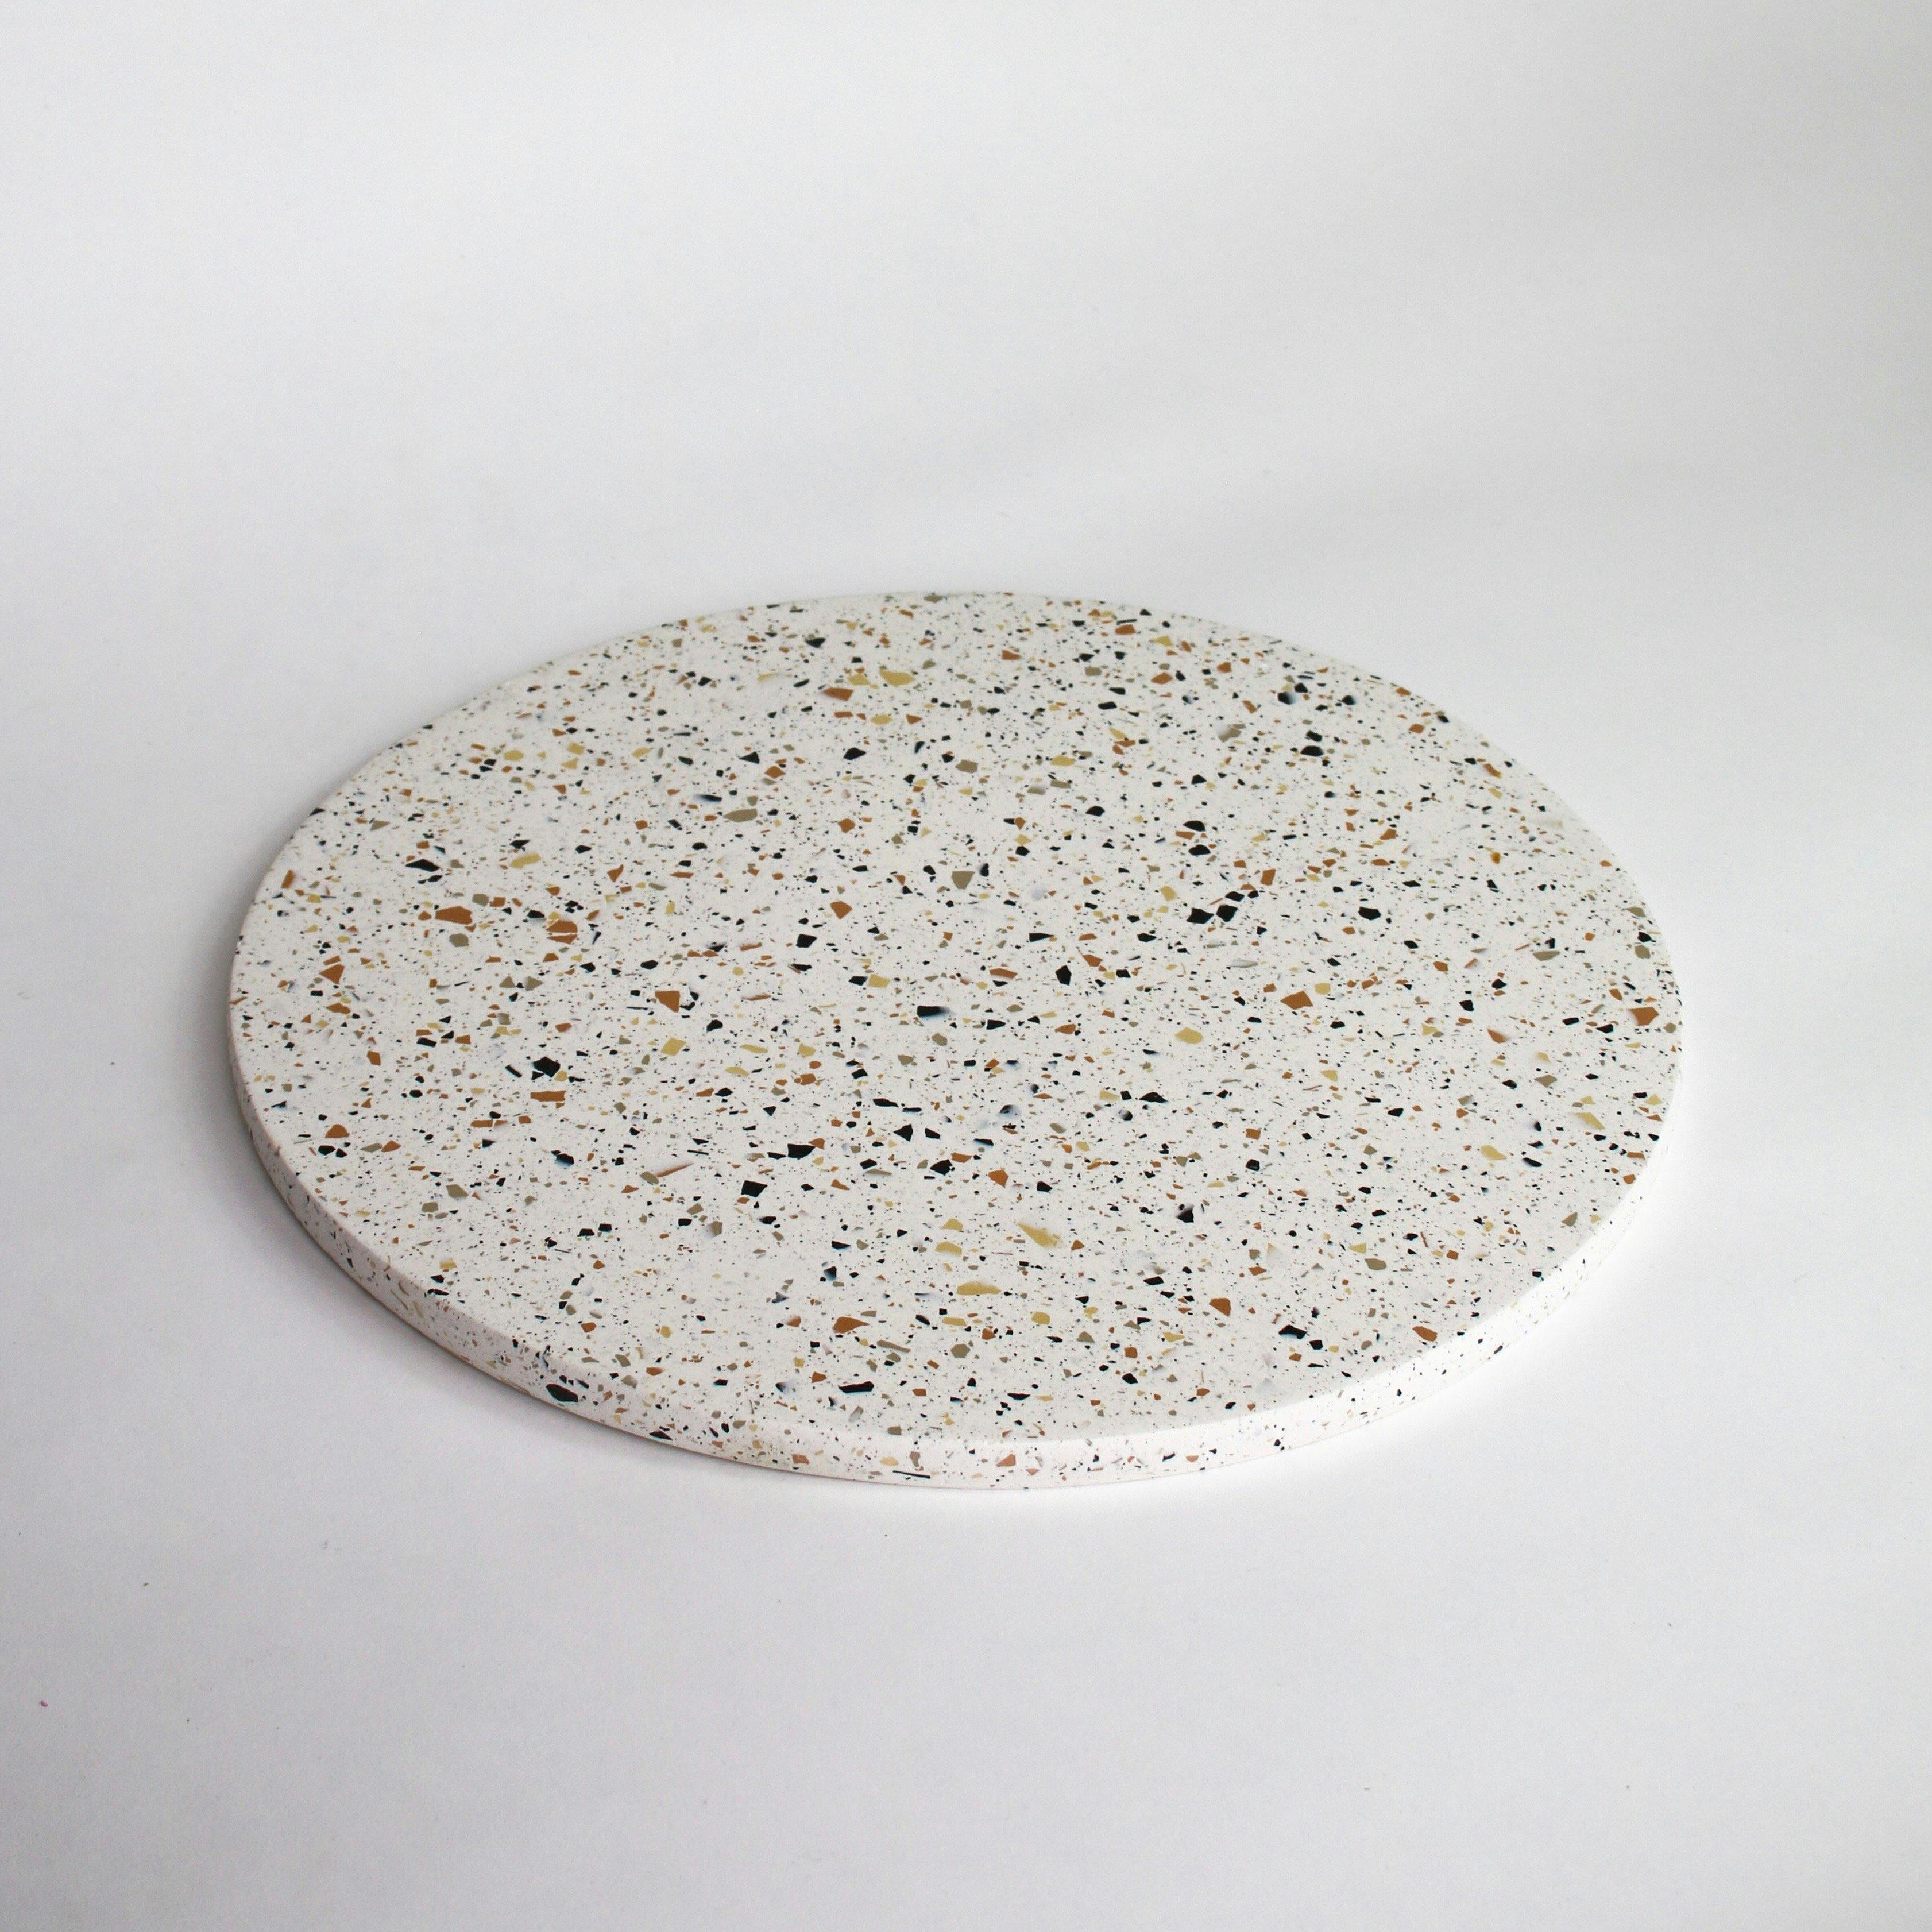 Hand made large white tray with recreated Terrazzo look and feel image 2